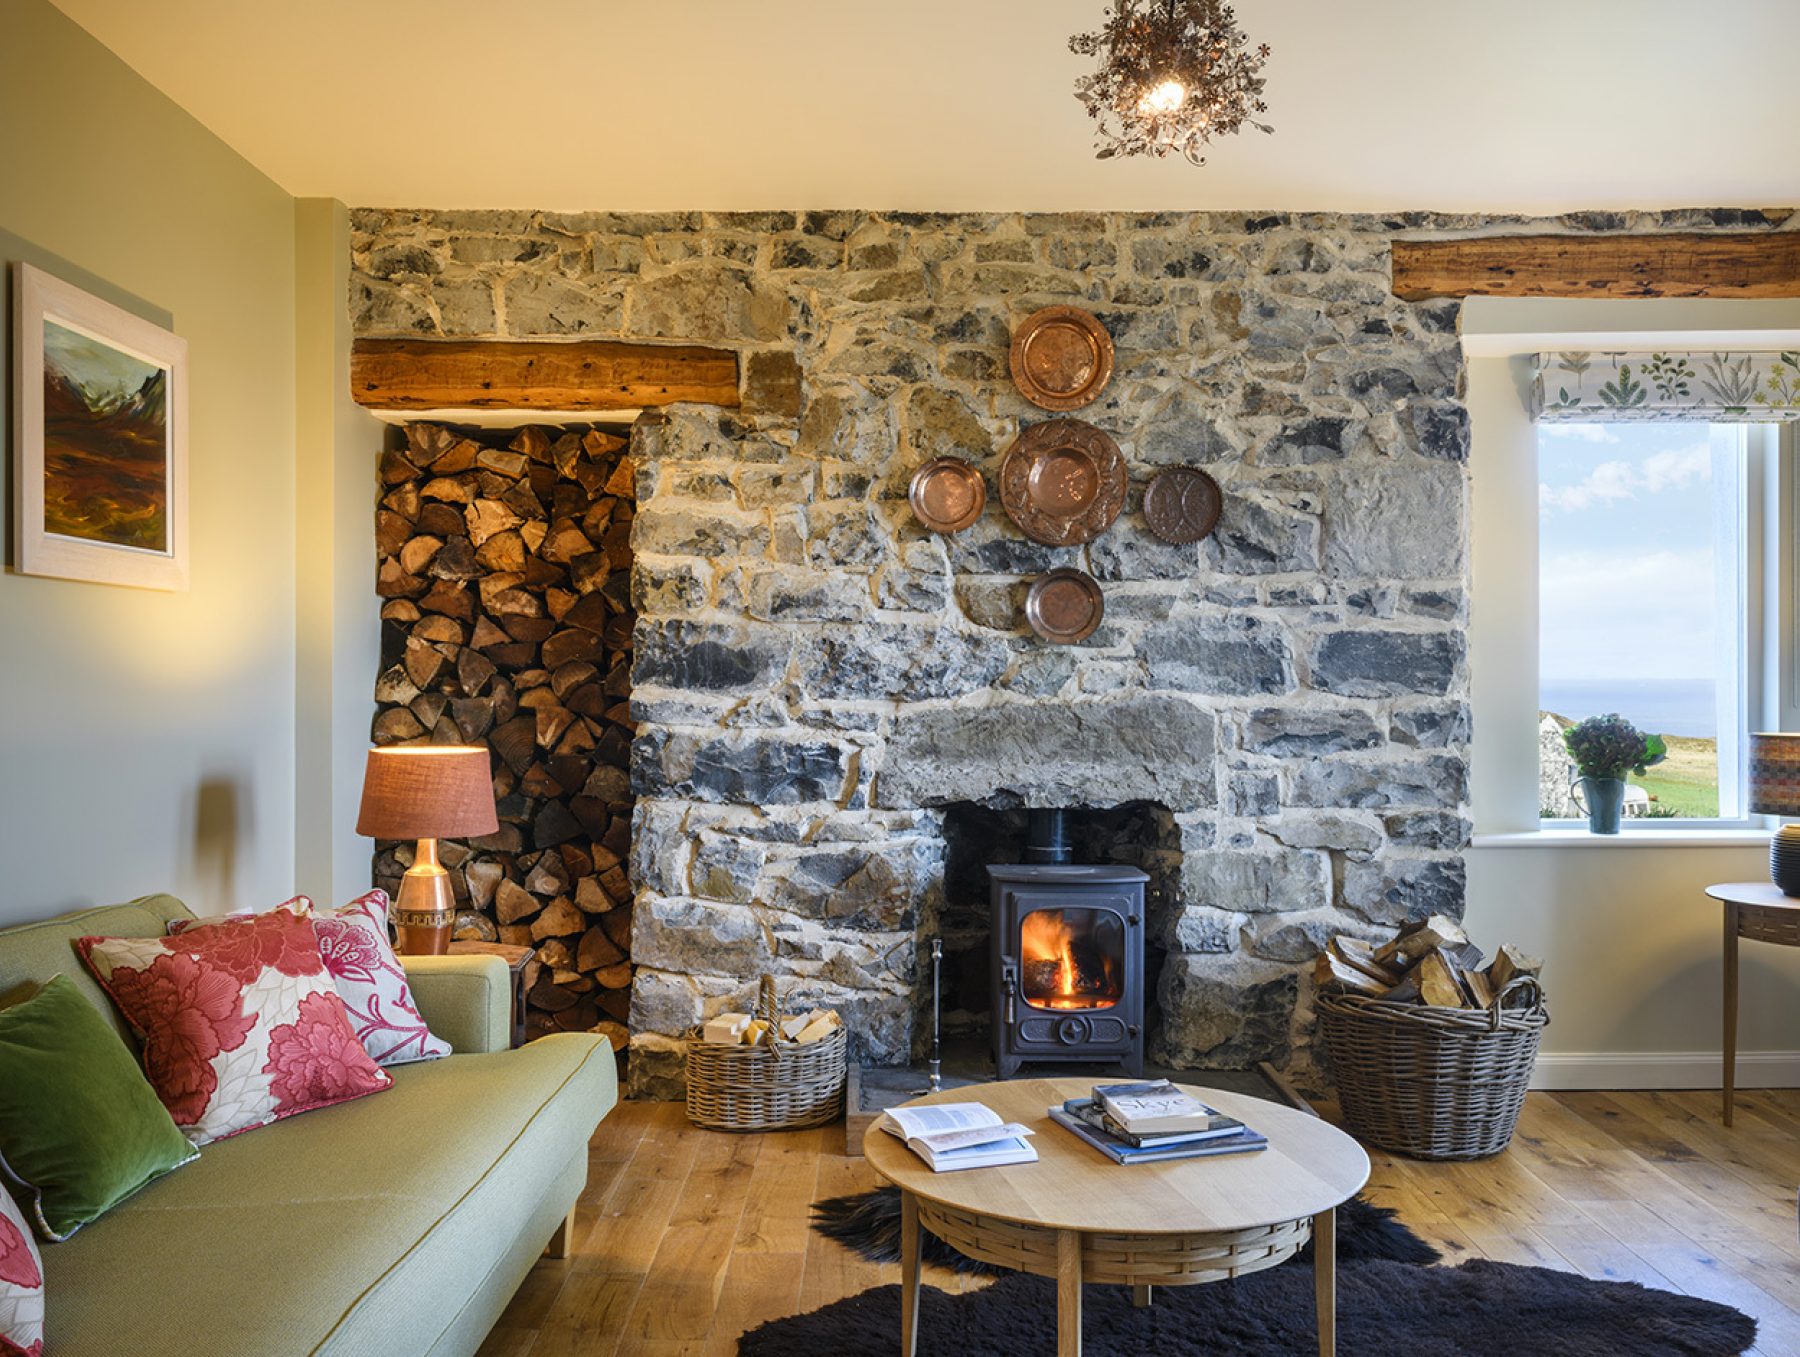 Croft House cottage has a toasty wood-burning stove with views out to the Islands of Harris and Lewis.